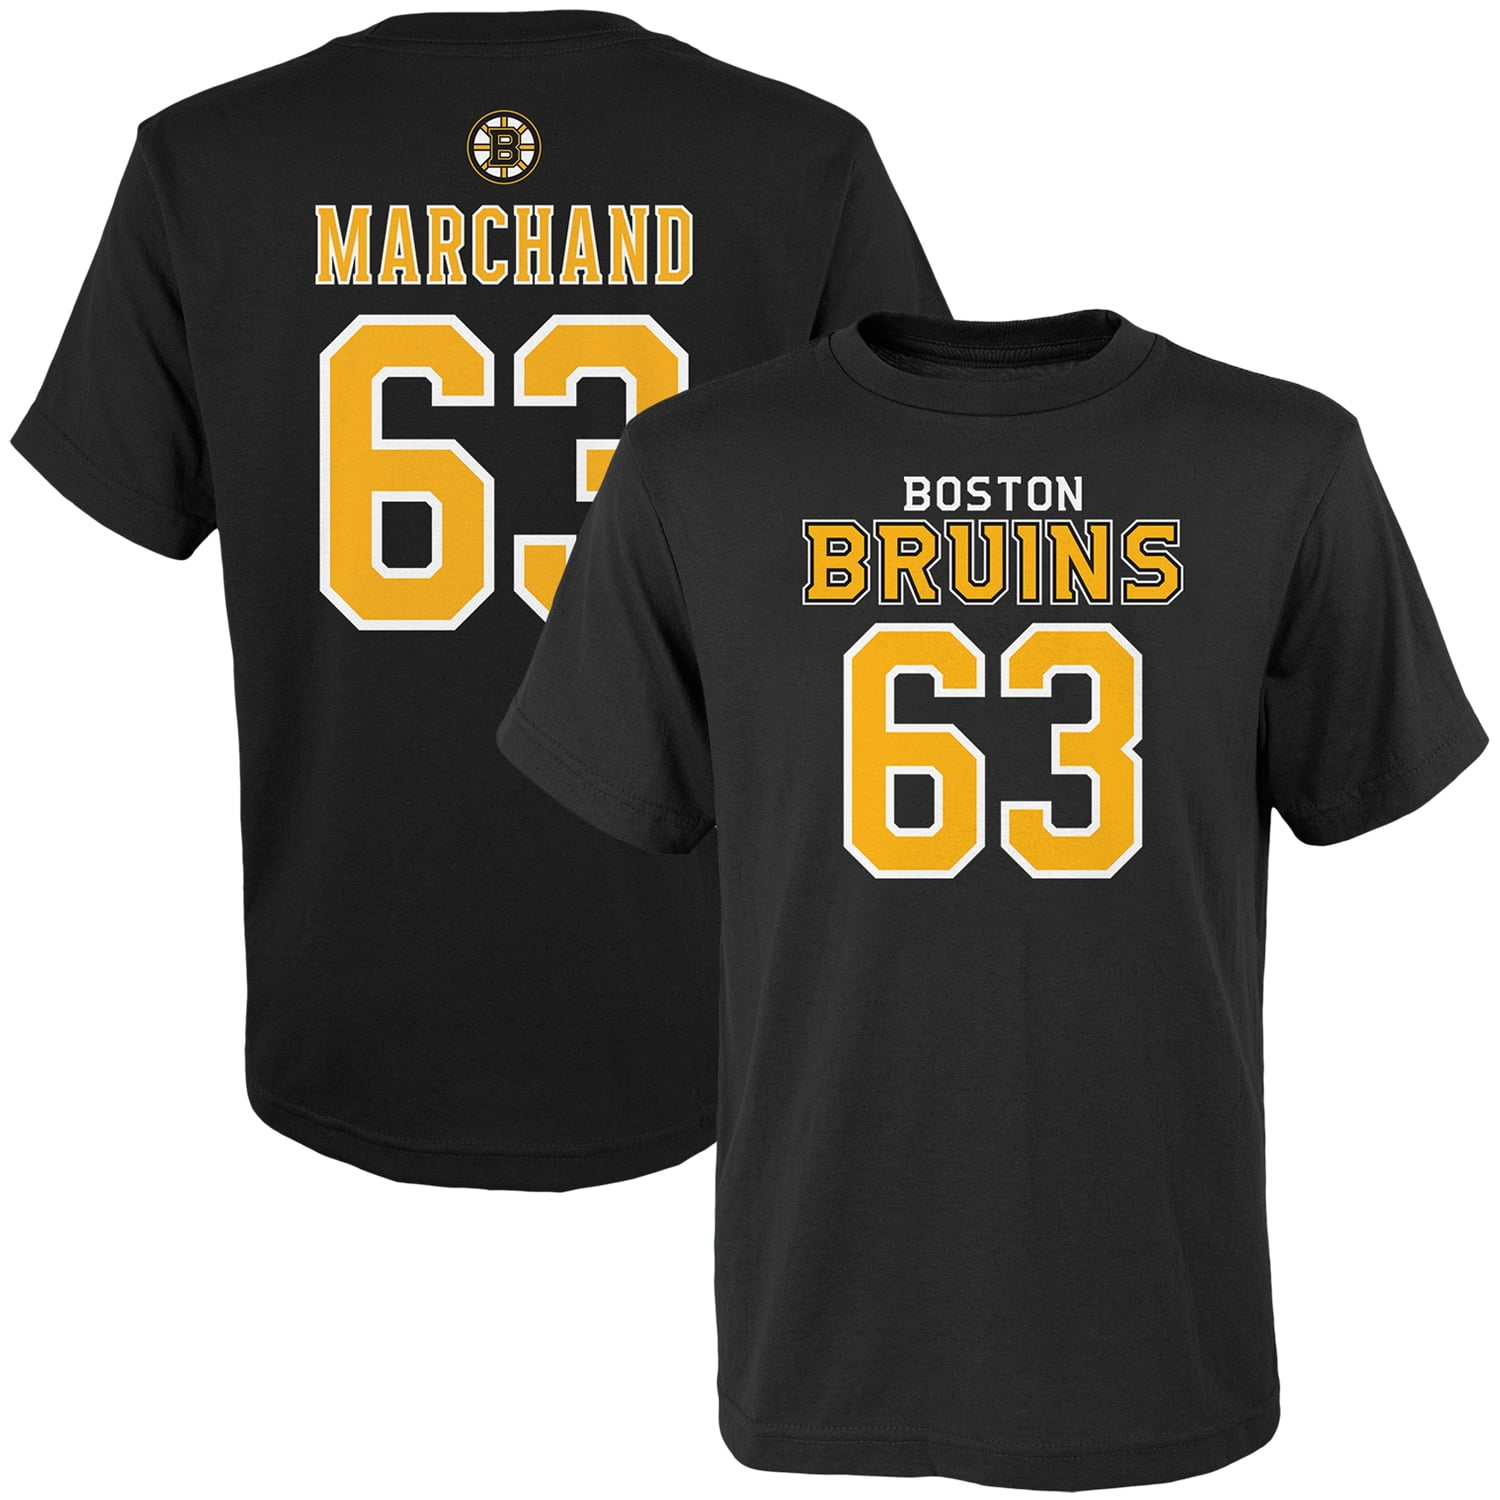 brad marchand youth jersey